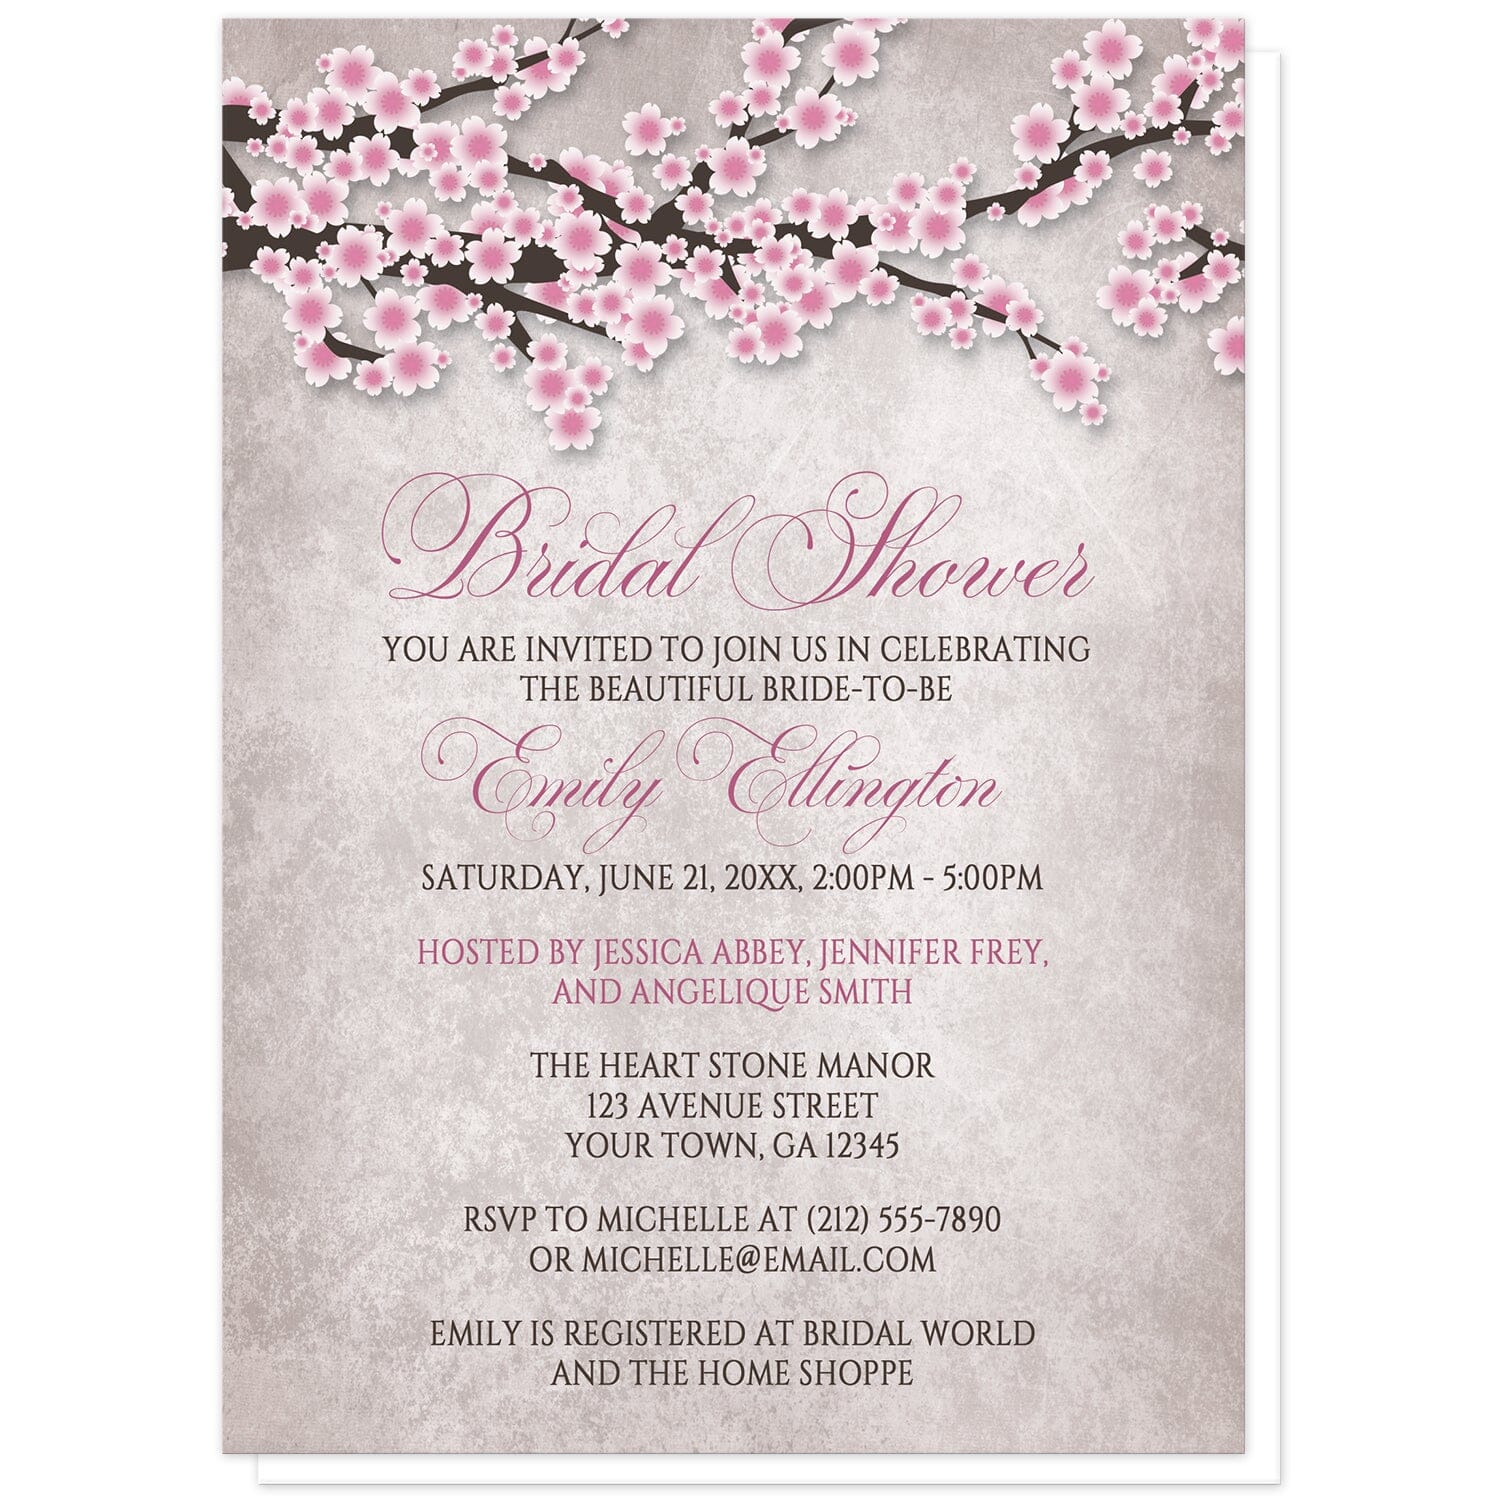 Rustic Pink Cherry Blossom Bridal Shower Invitations at Artistically Invited. Rustic pink cherry blossom bridal shower invitations featuring an illustration of pink and white with dark brown cherry blossom branches along the top. Your personalized bridal shower celebration details are custom printed in pink and dark brown over a stony grayish brown background below the pretty cherry blossom branches. 